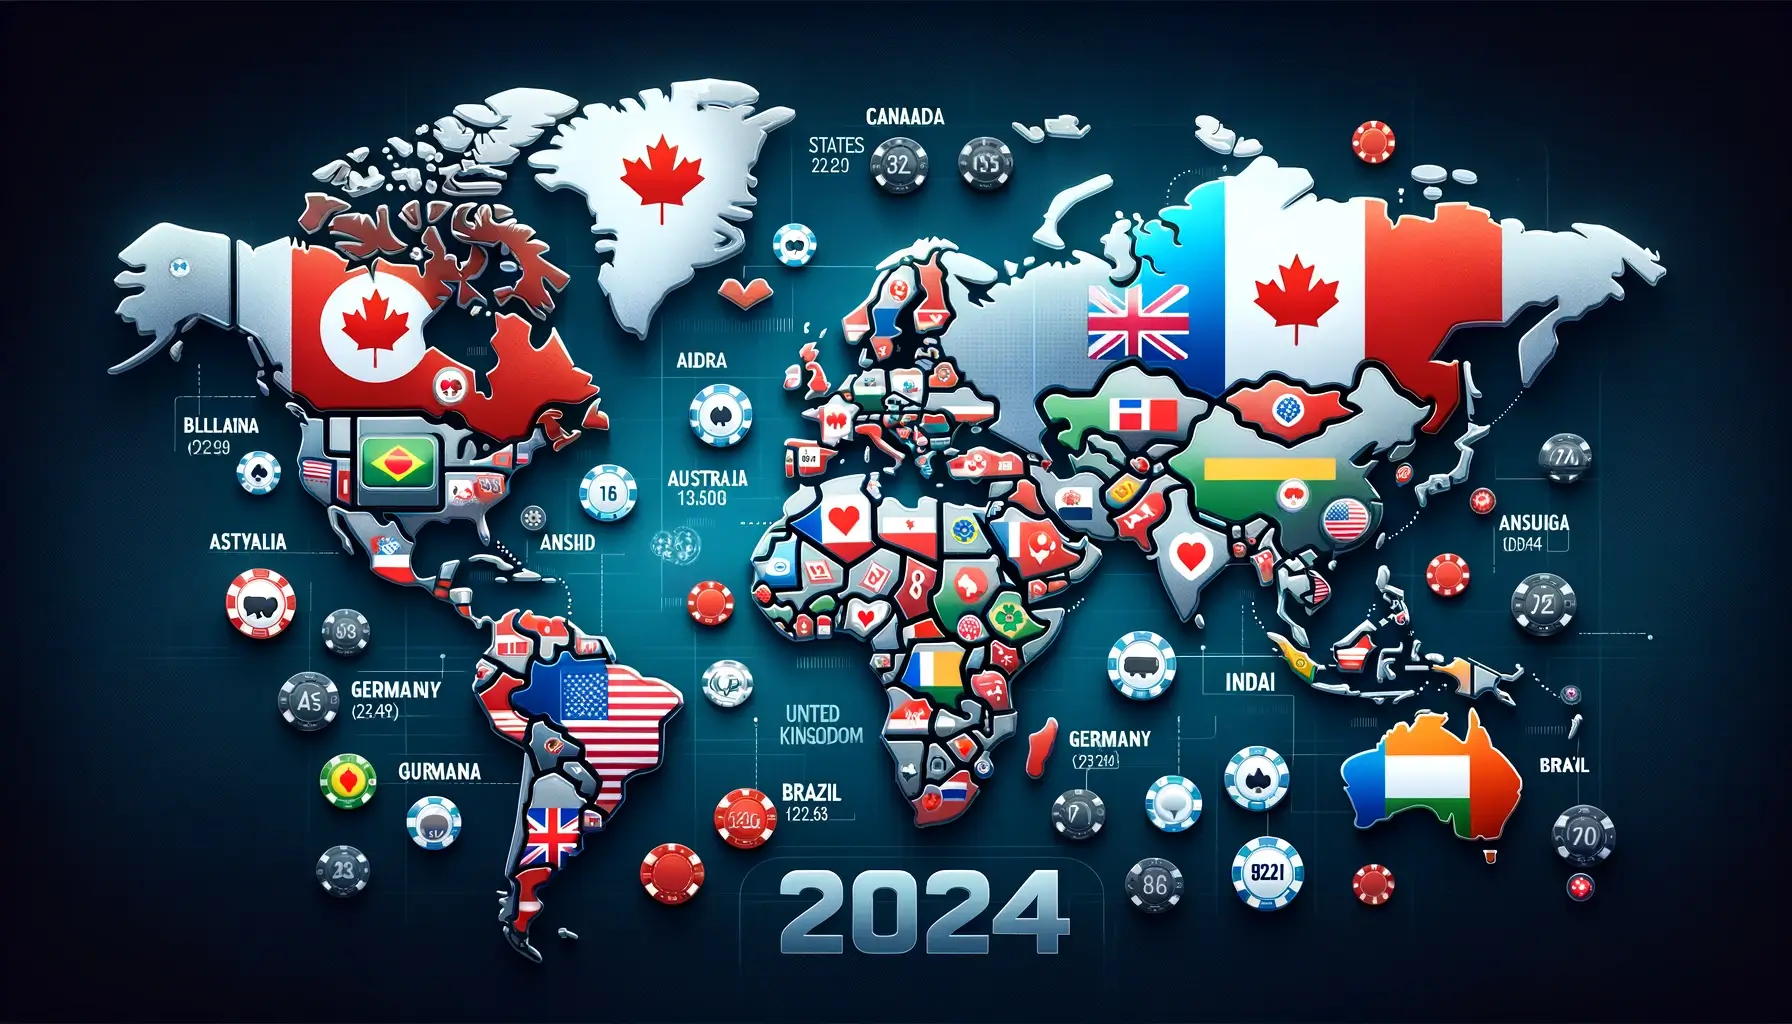 A world map with the United States, United Kingdom, Canada, Australia, Germany, Brazil, and India marked as leading countries in online poker. The map includes poker icons like playing cards and chips.